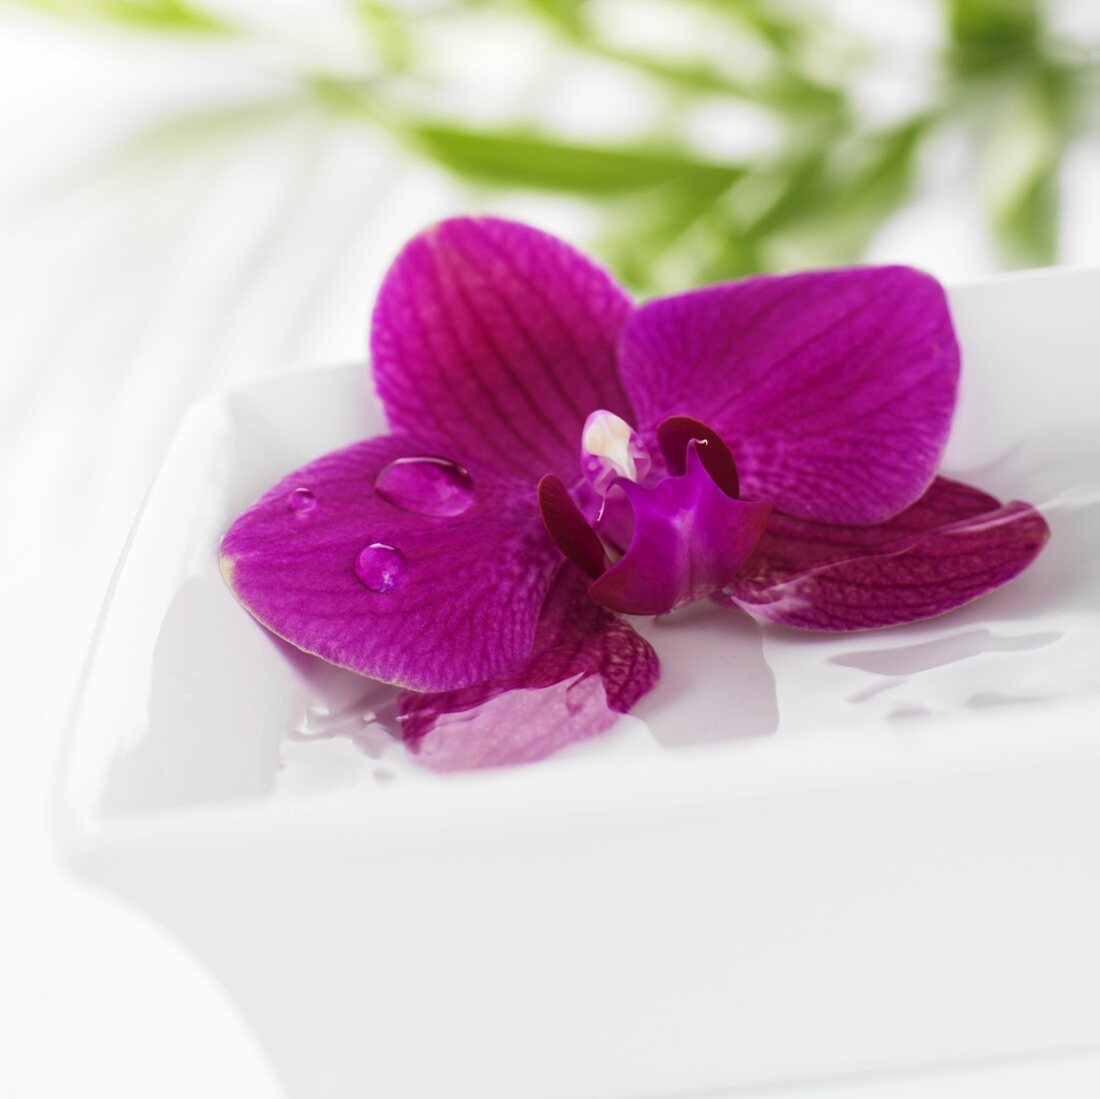 Purple orchid in dish of water